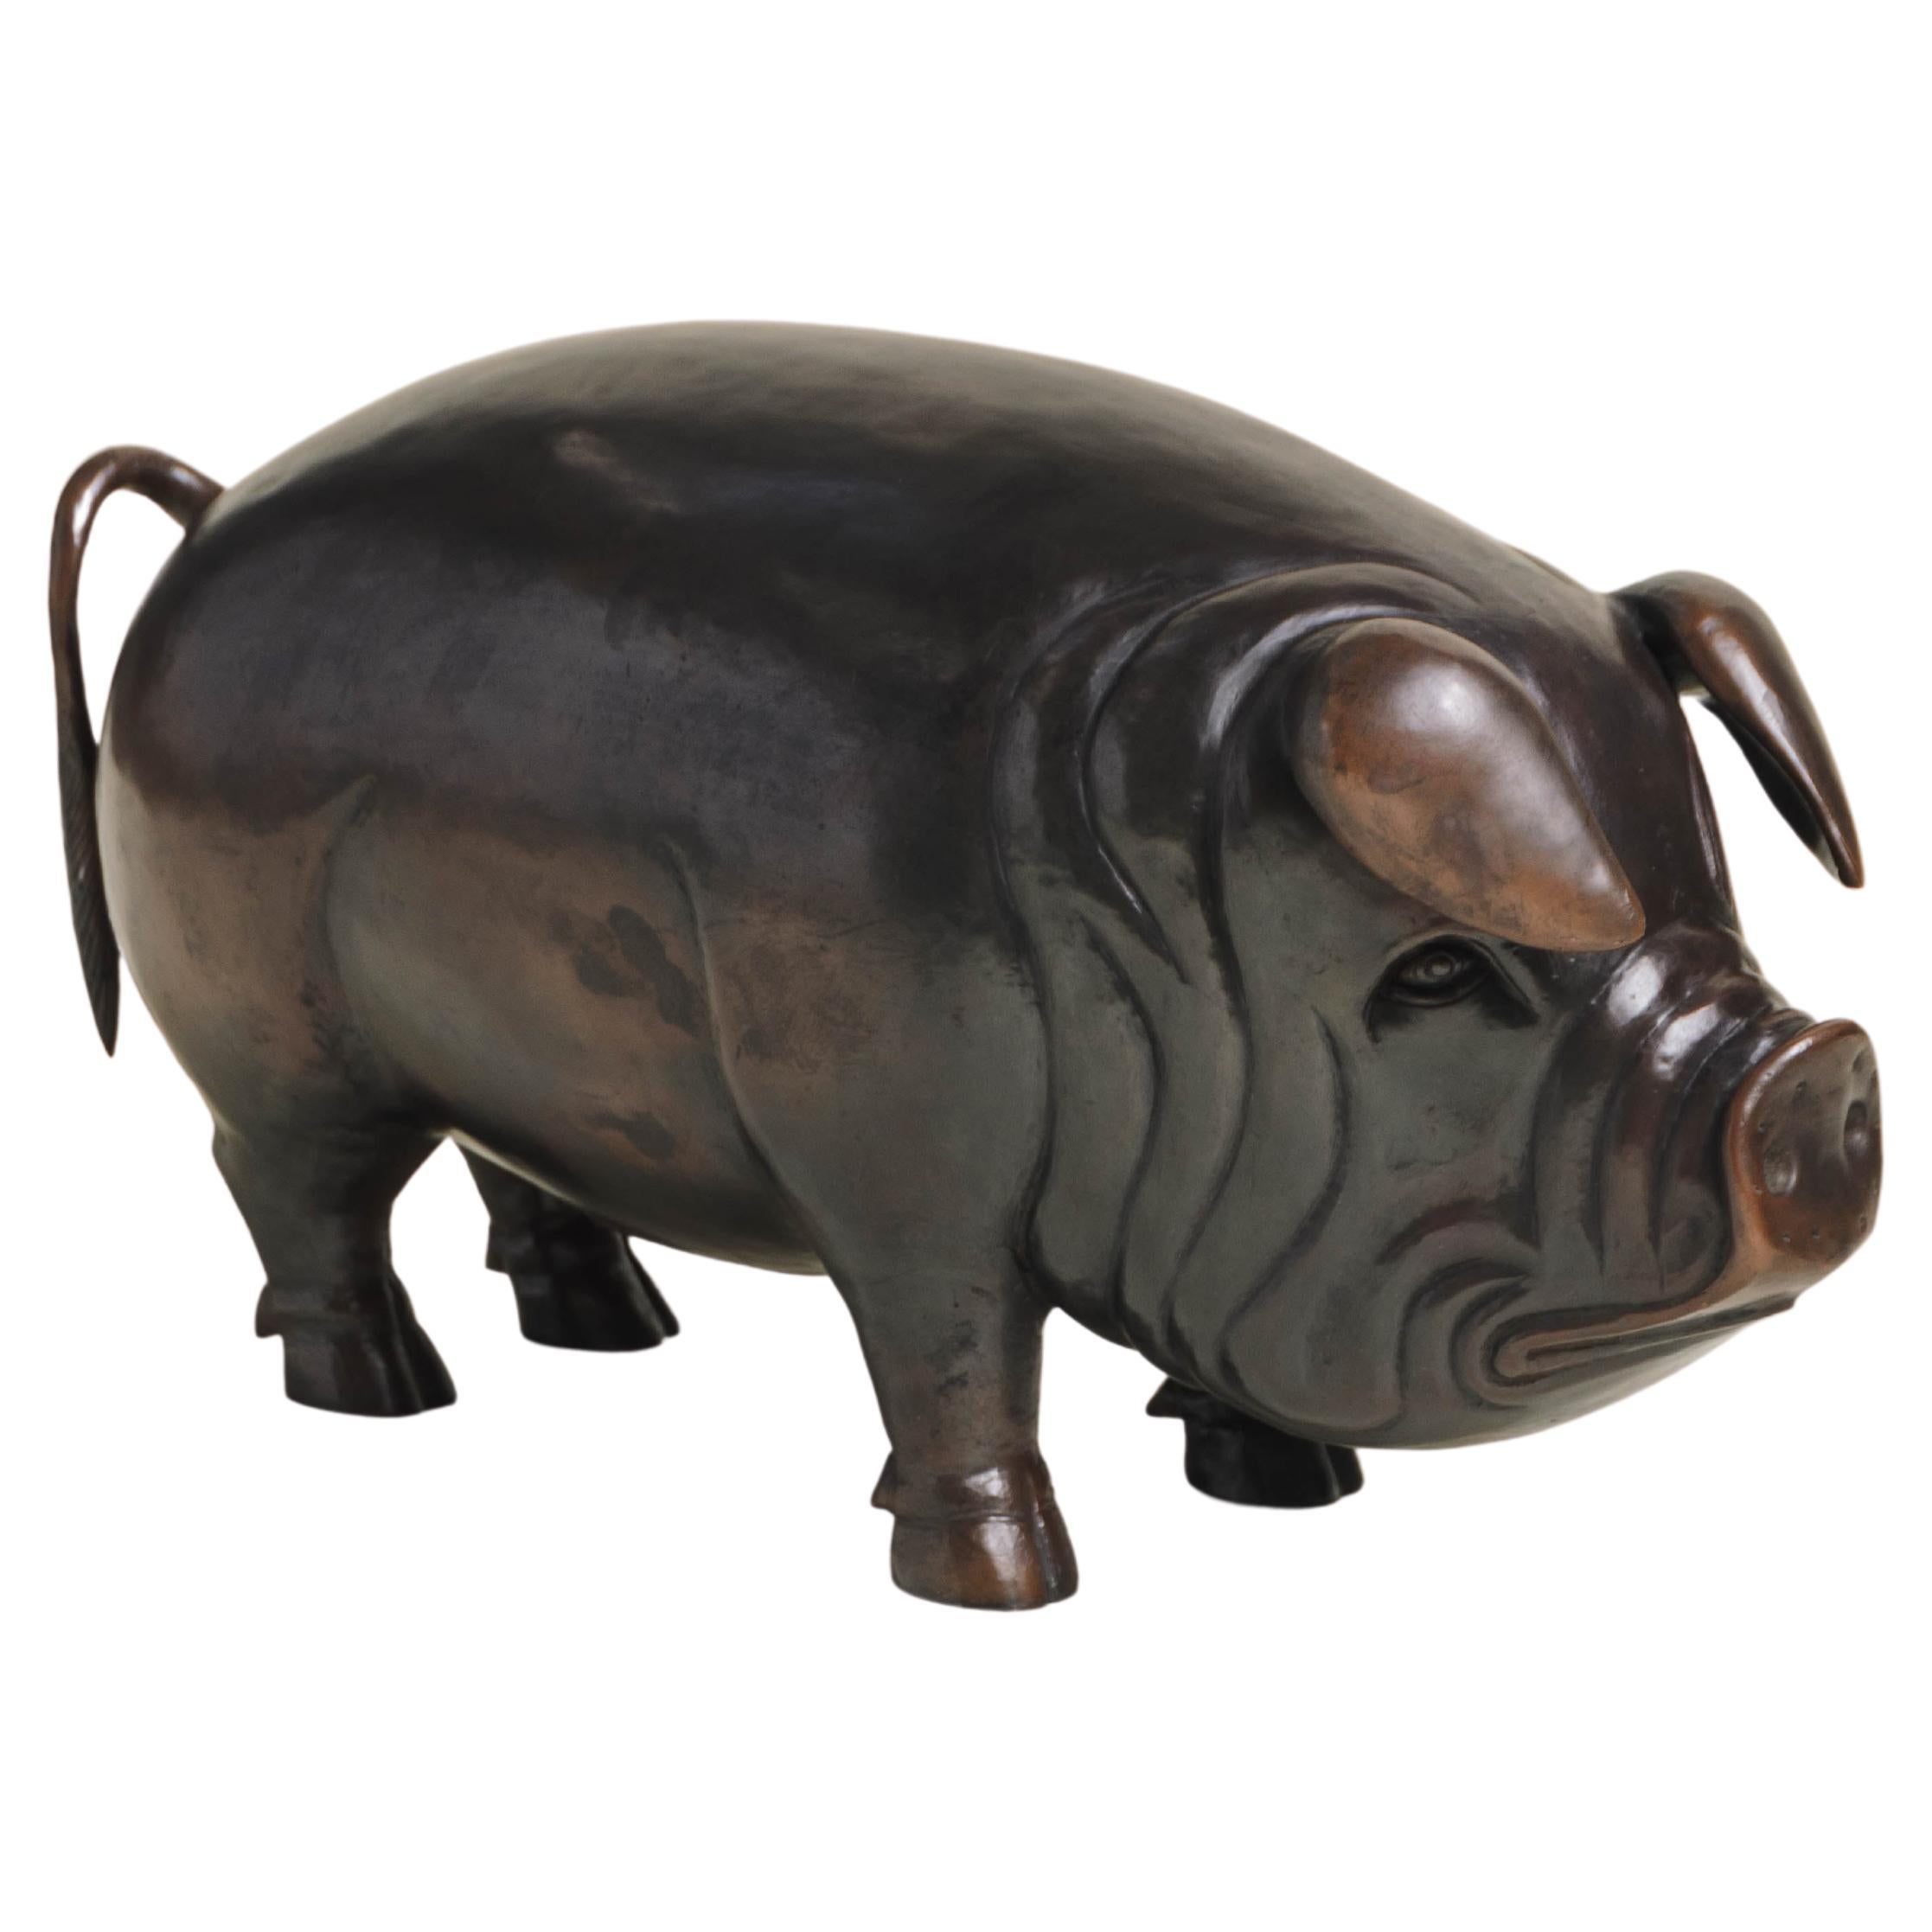 Contemporary Hand Repoussé Pig Sculpture in Dark Antique Copper by Robert Kuo For Sale